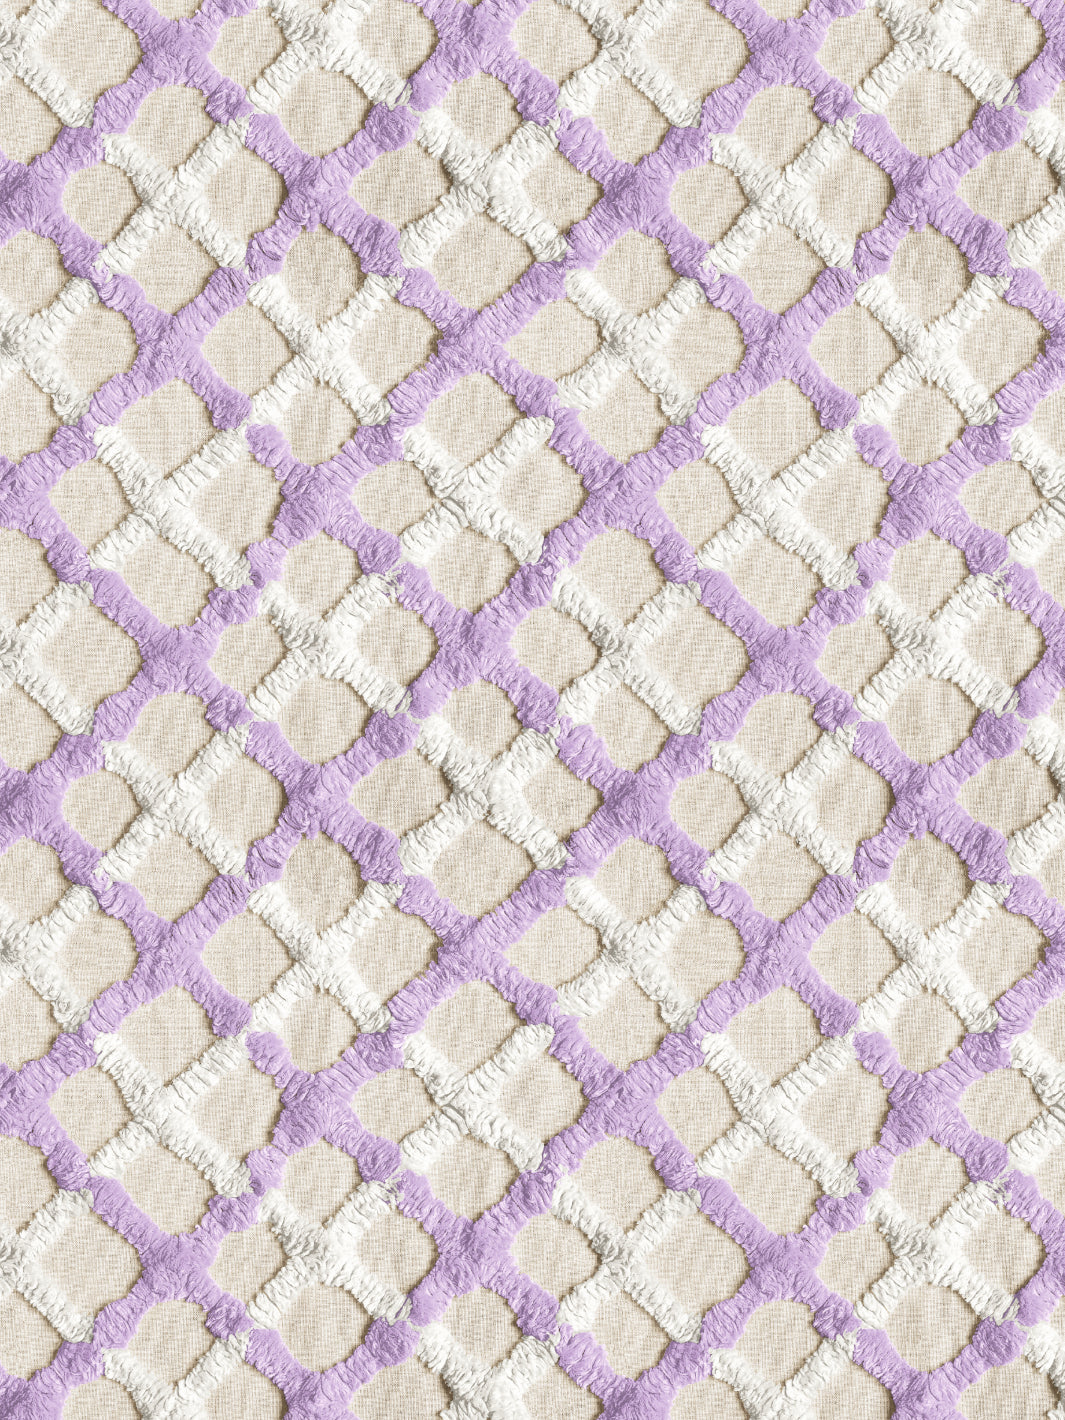 'Chenille Quilt' Wallpaper by Chris Benz - Lilac